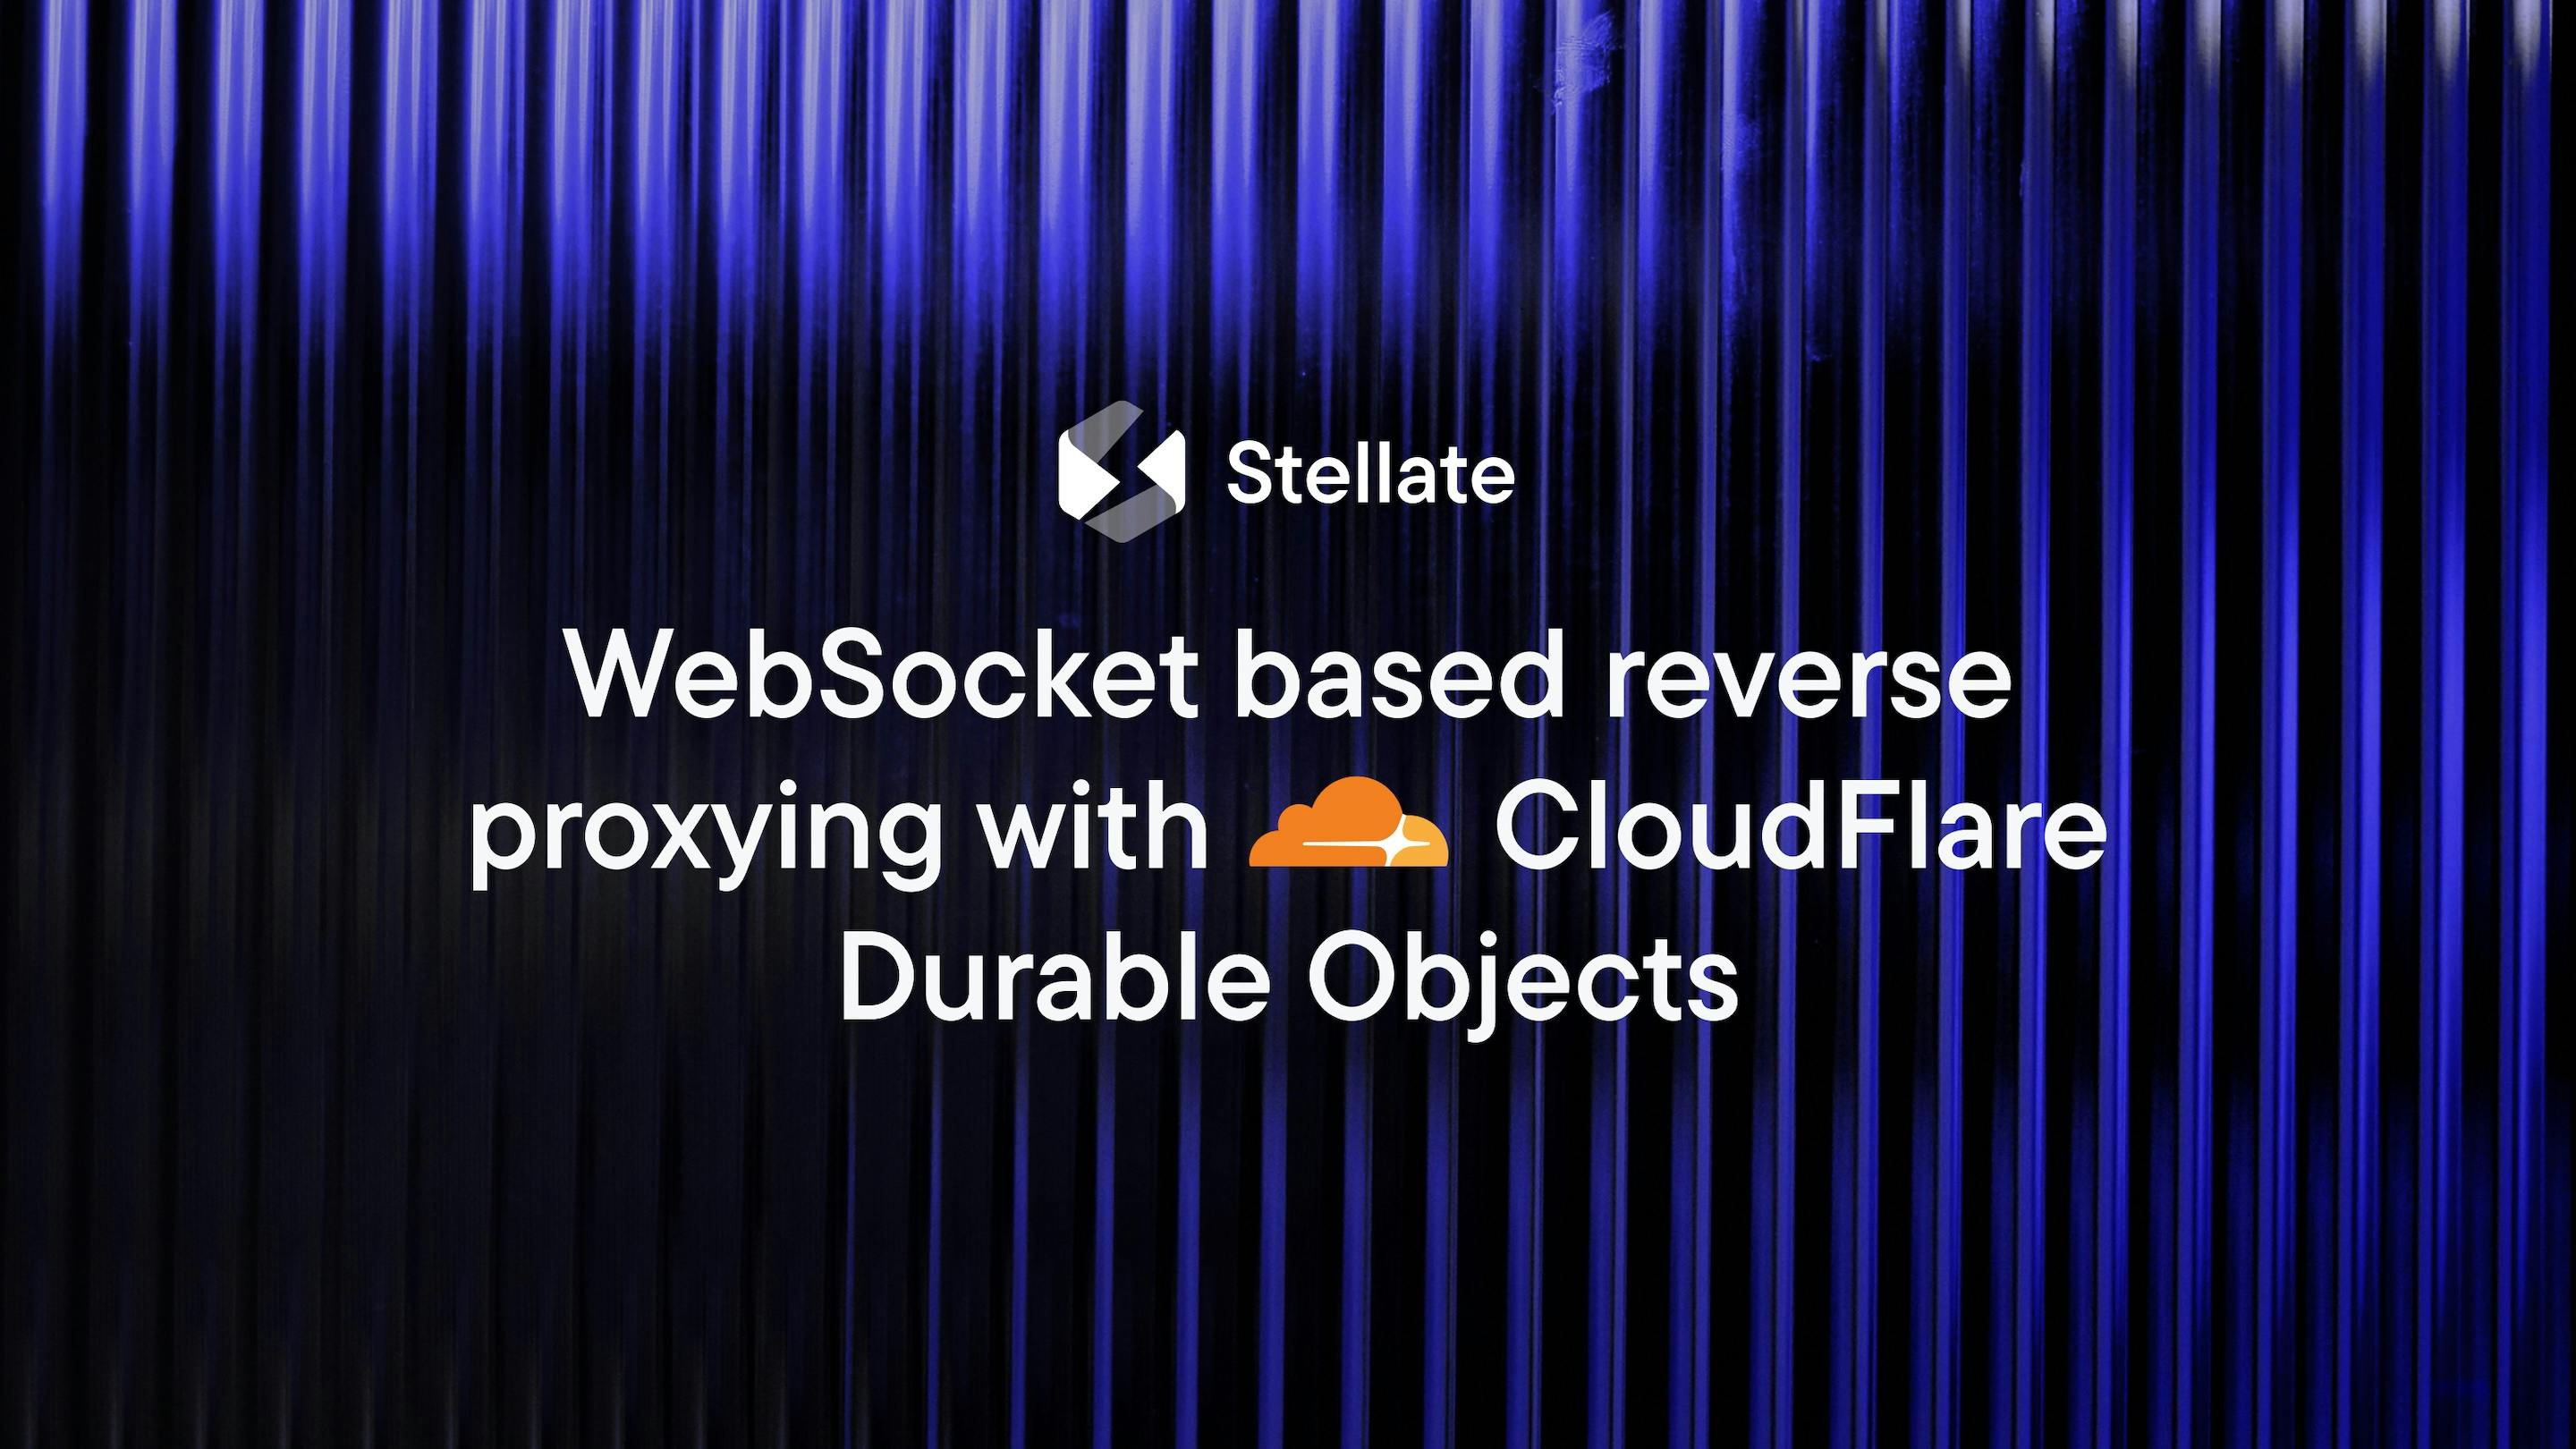 WebSocket-based Reverse Proxying with CloudFlare Durable Objects